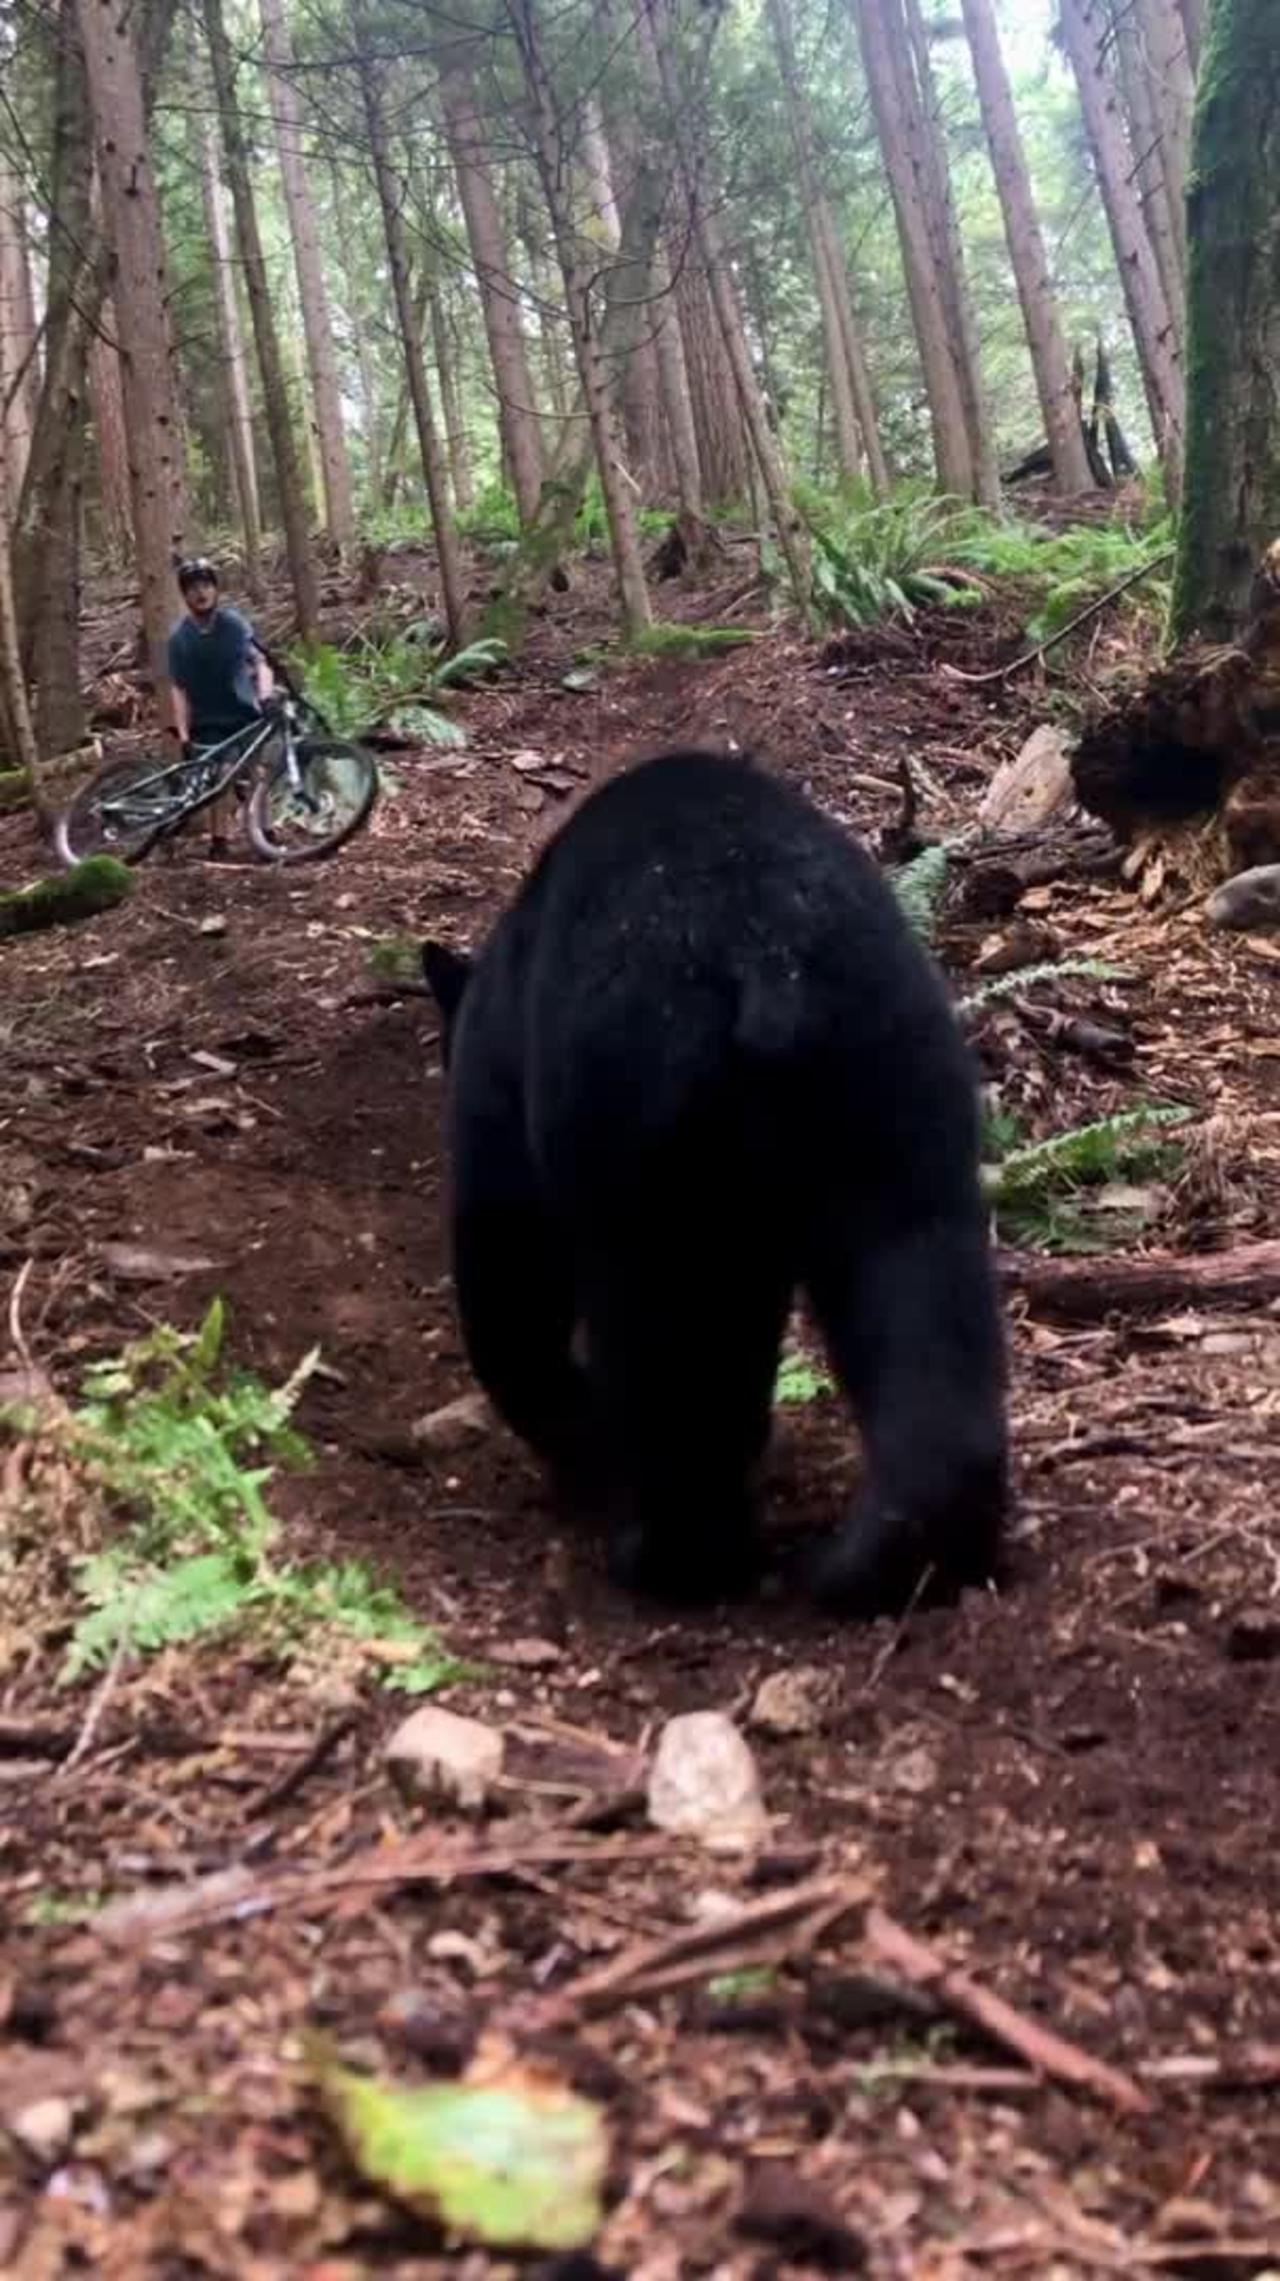 Bear scares hiker off trail in Monrovia, CA